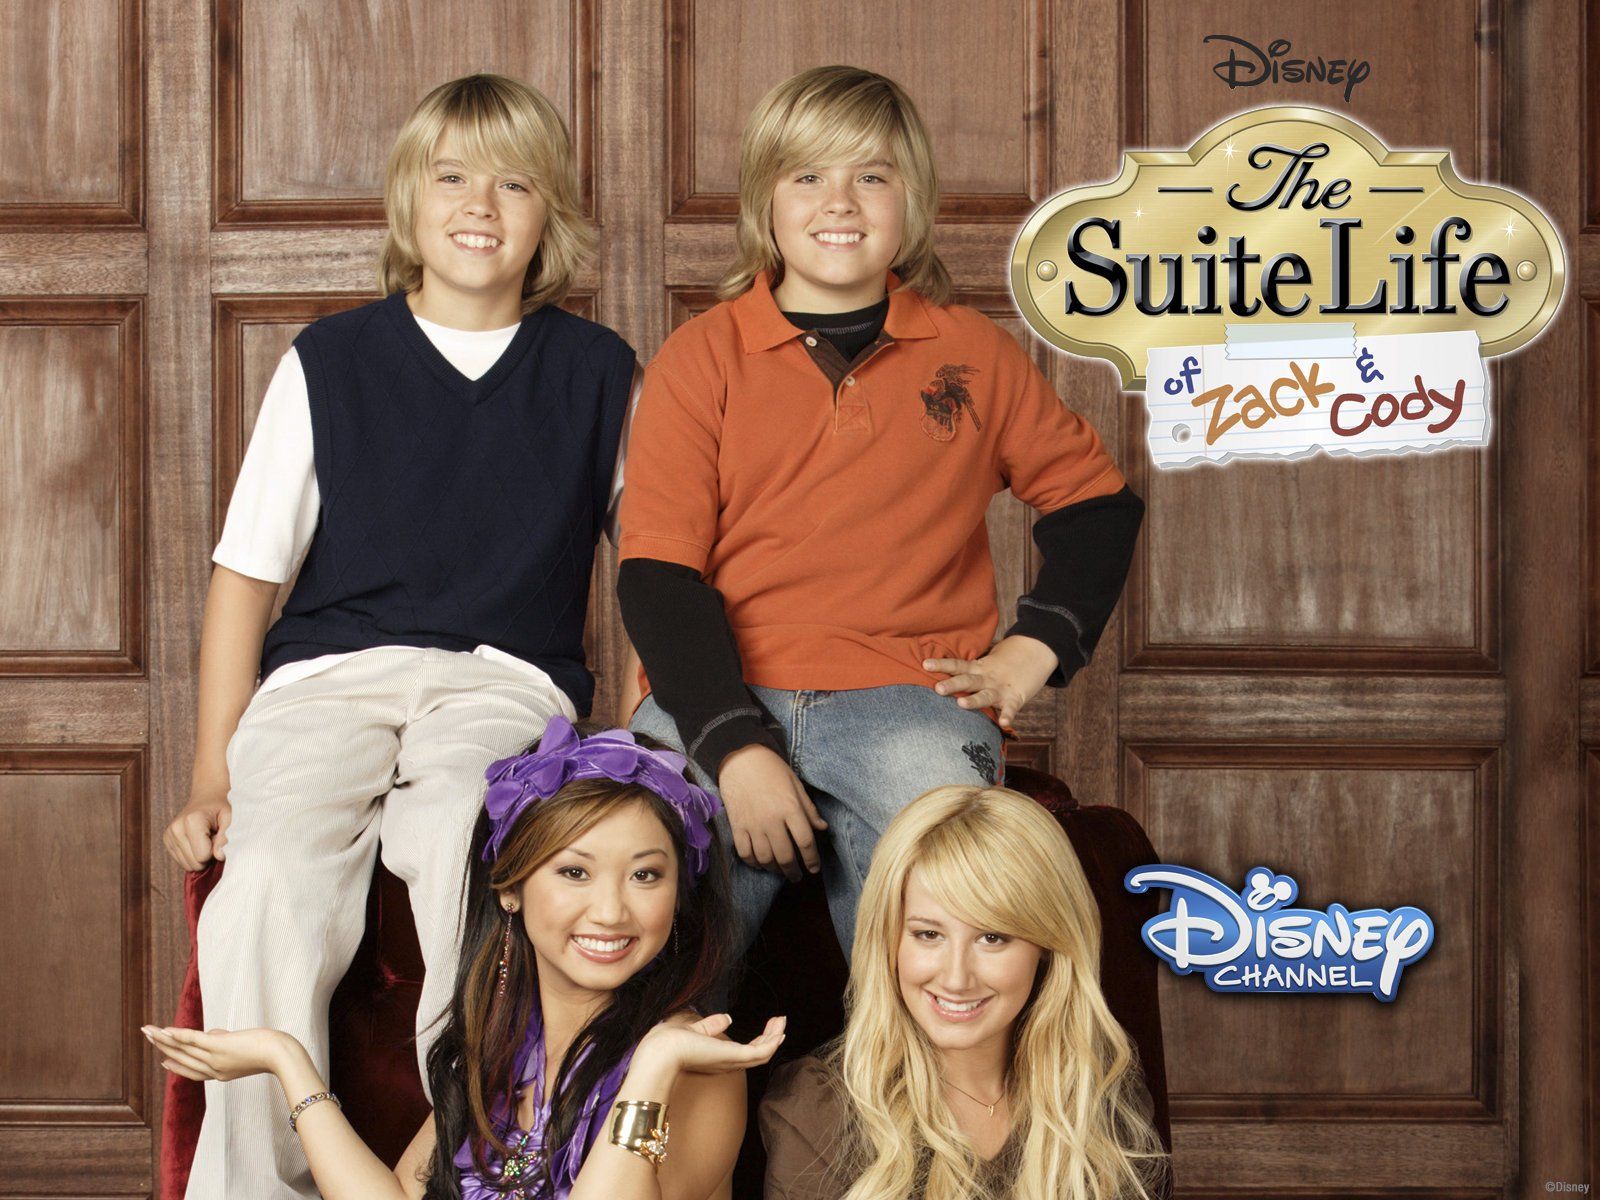 Watch The Suite Life of Zack & Cody Volume 5